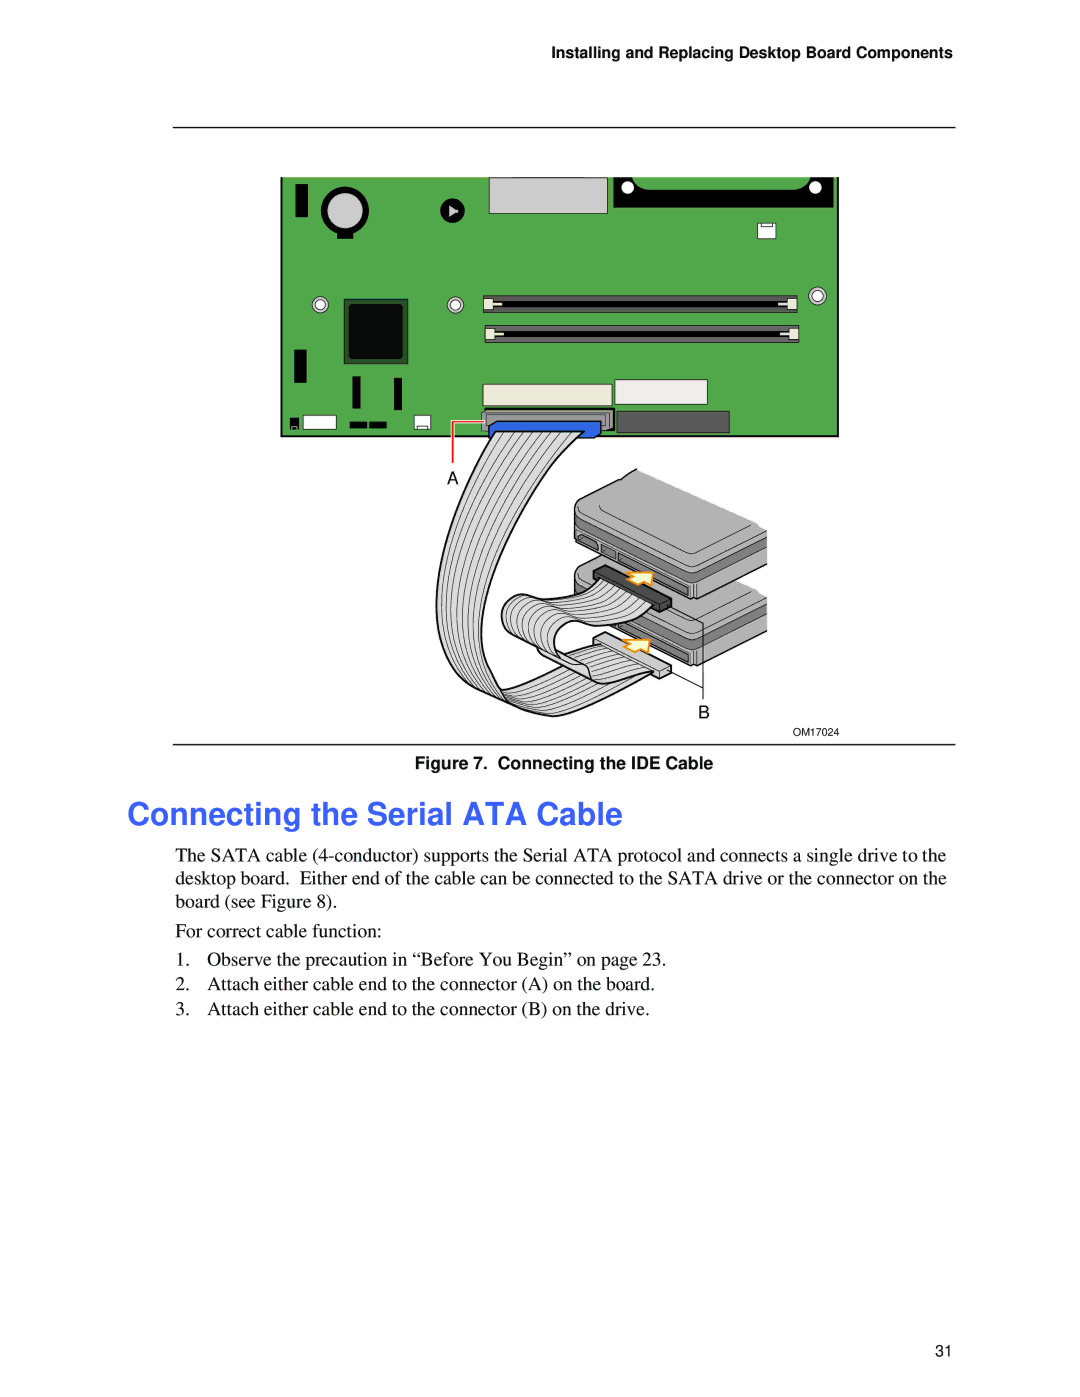 Intel D865GVHZ manual Connecting the Serial ATA Cable, Connecting the IDE Cable 